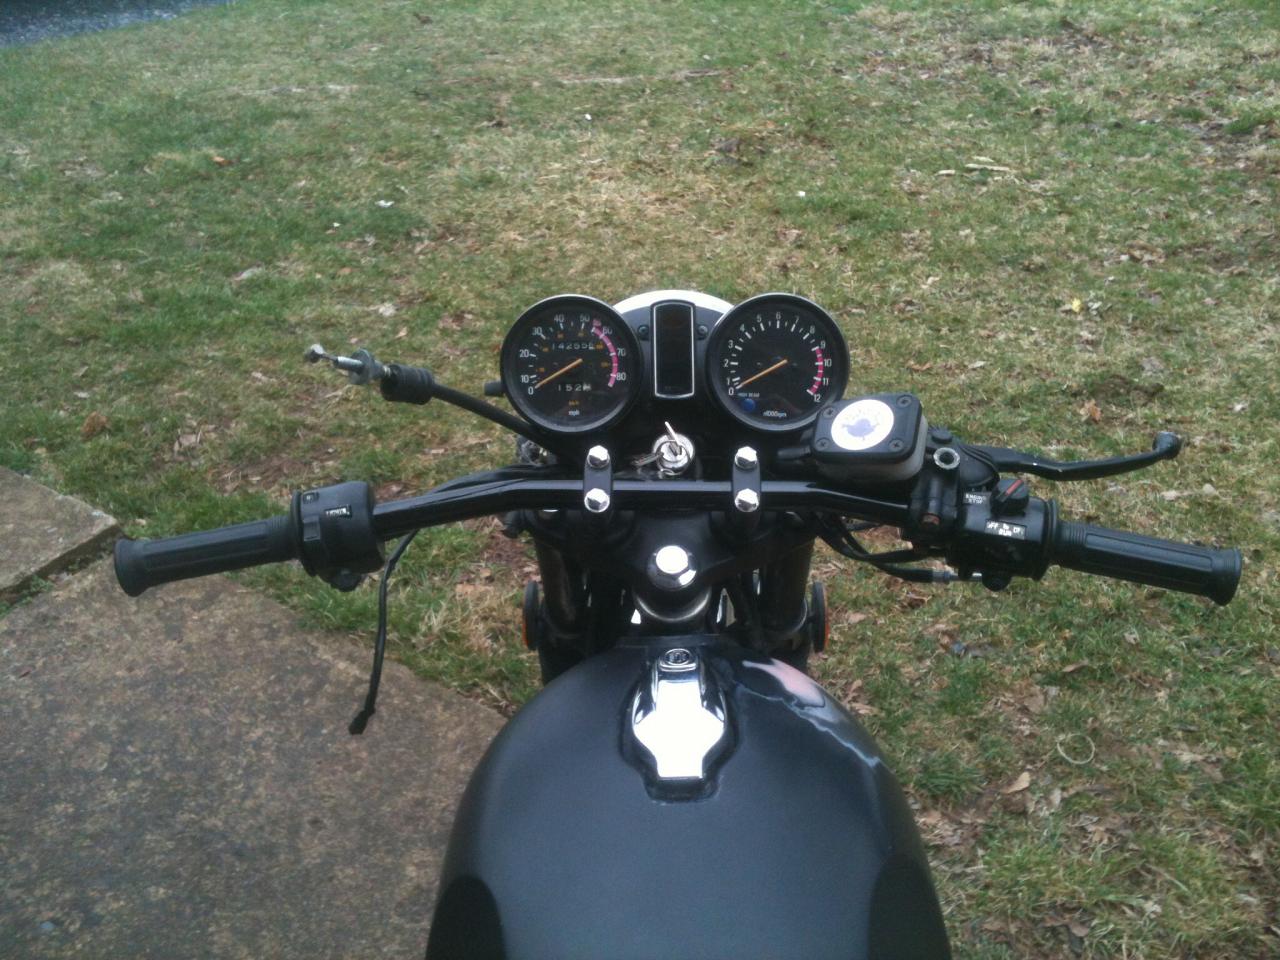 Bought drag handlebars from Mikesxs to give a try. I think they look awesome! I had to shorten the clutch cable though.